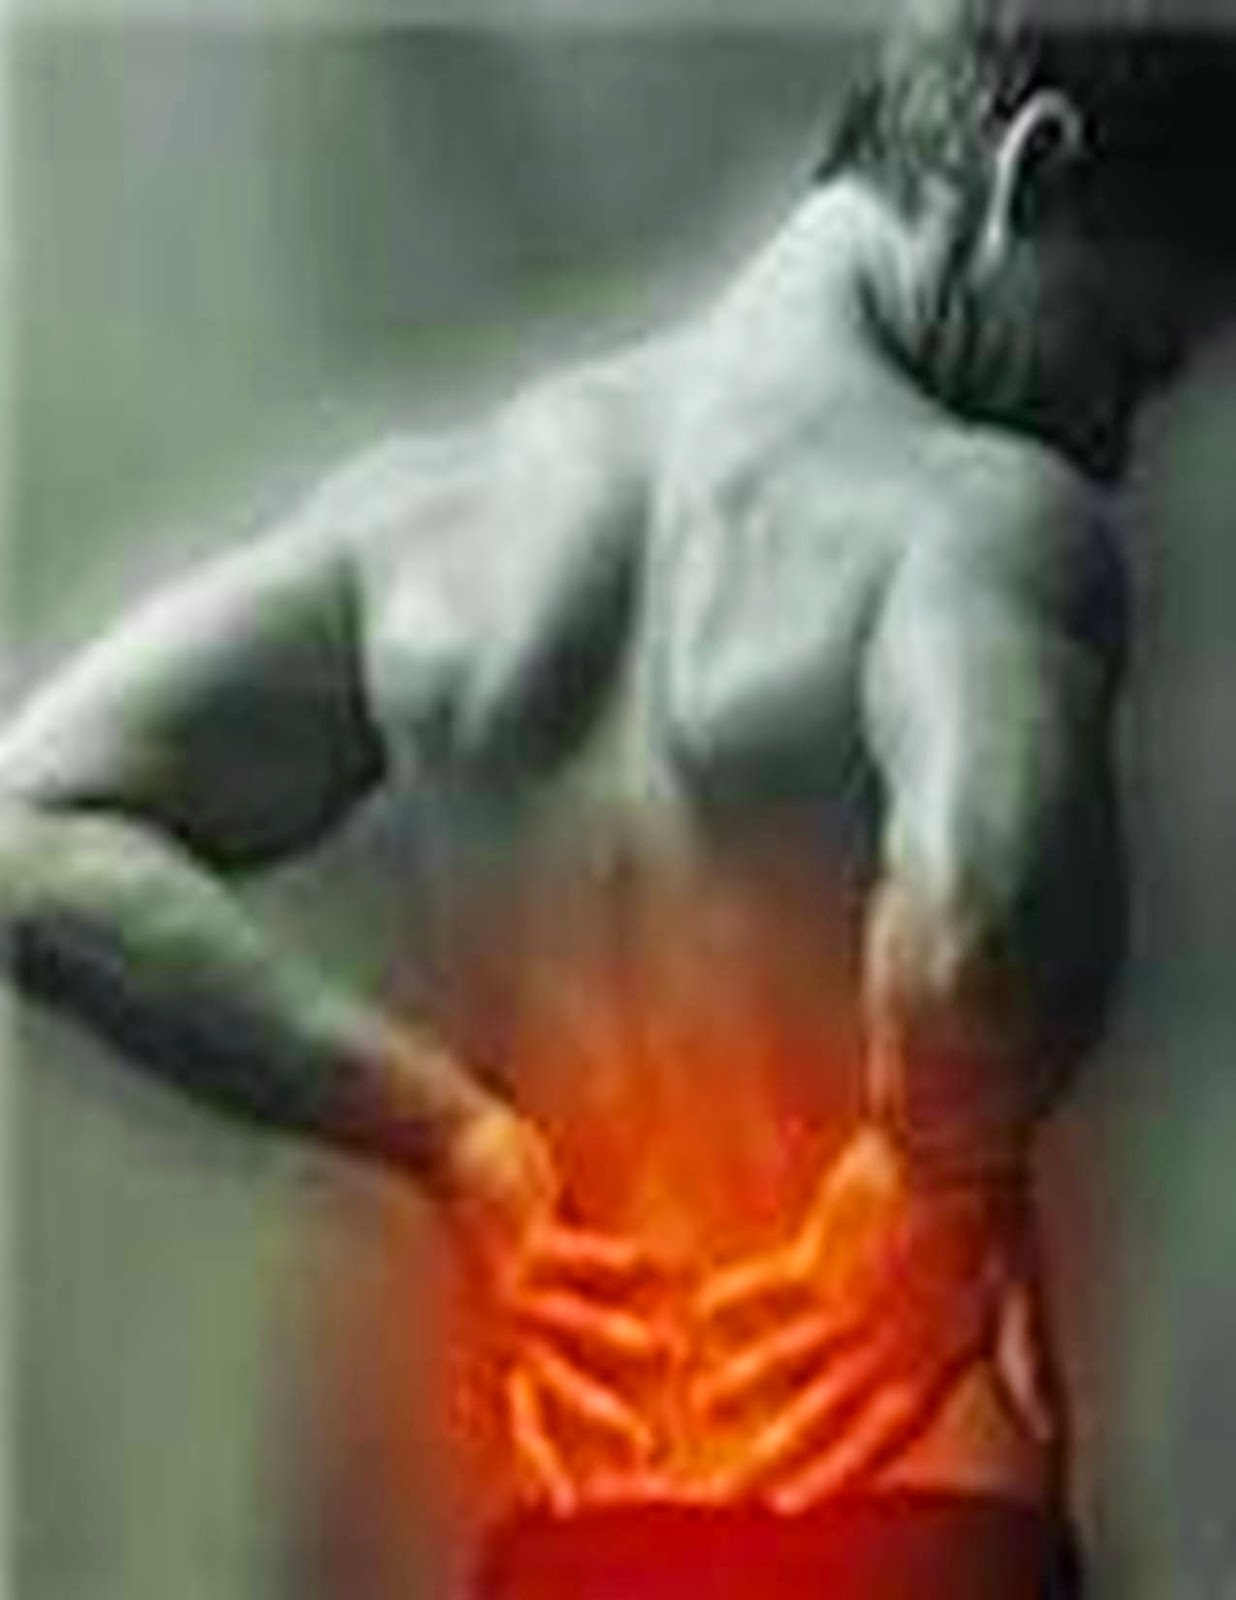 http://www.interventionalpainmanagement.com/back-and-neck-pain.html